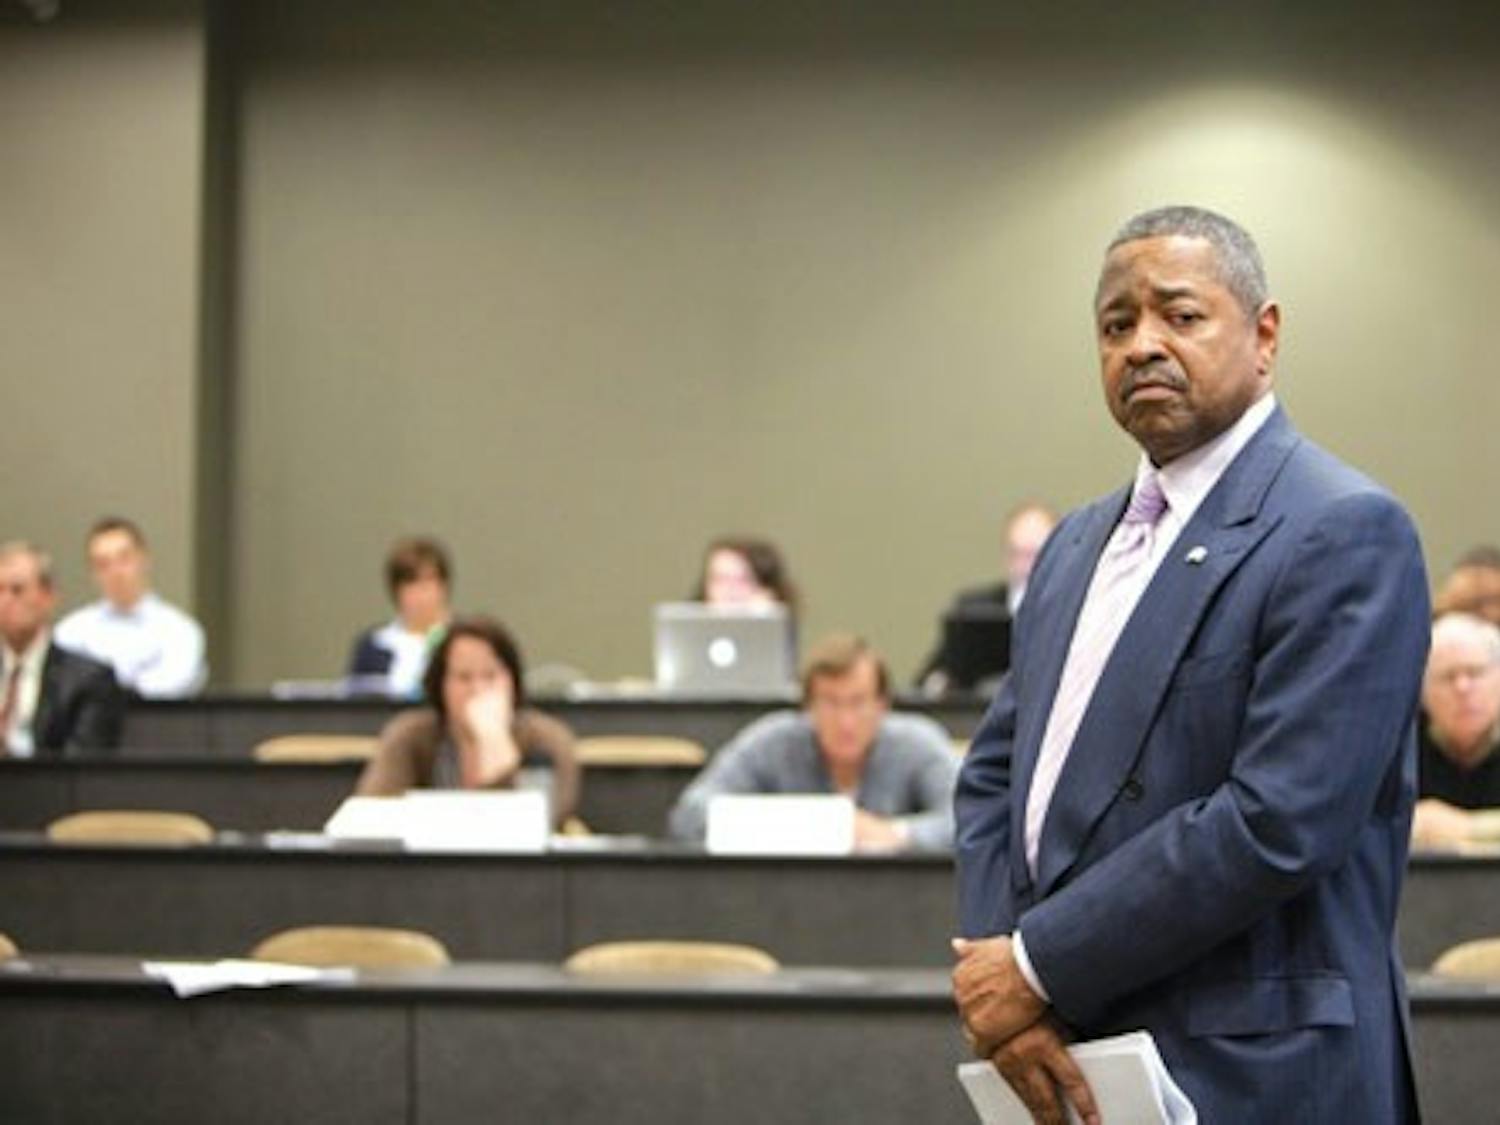 McDavis' SB 5 stance prompts faculty action  